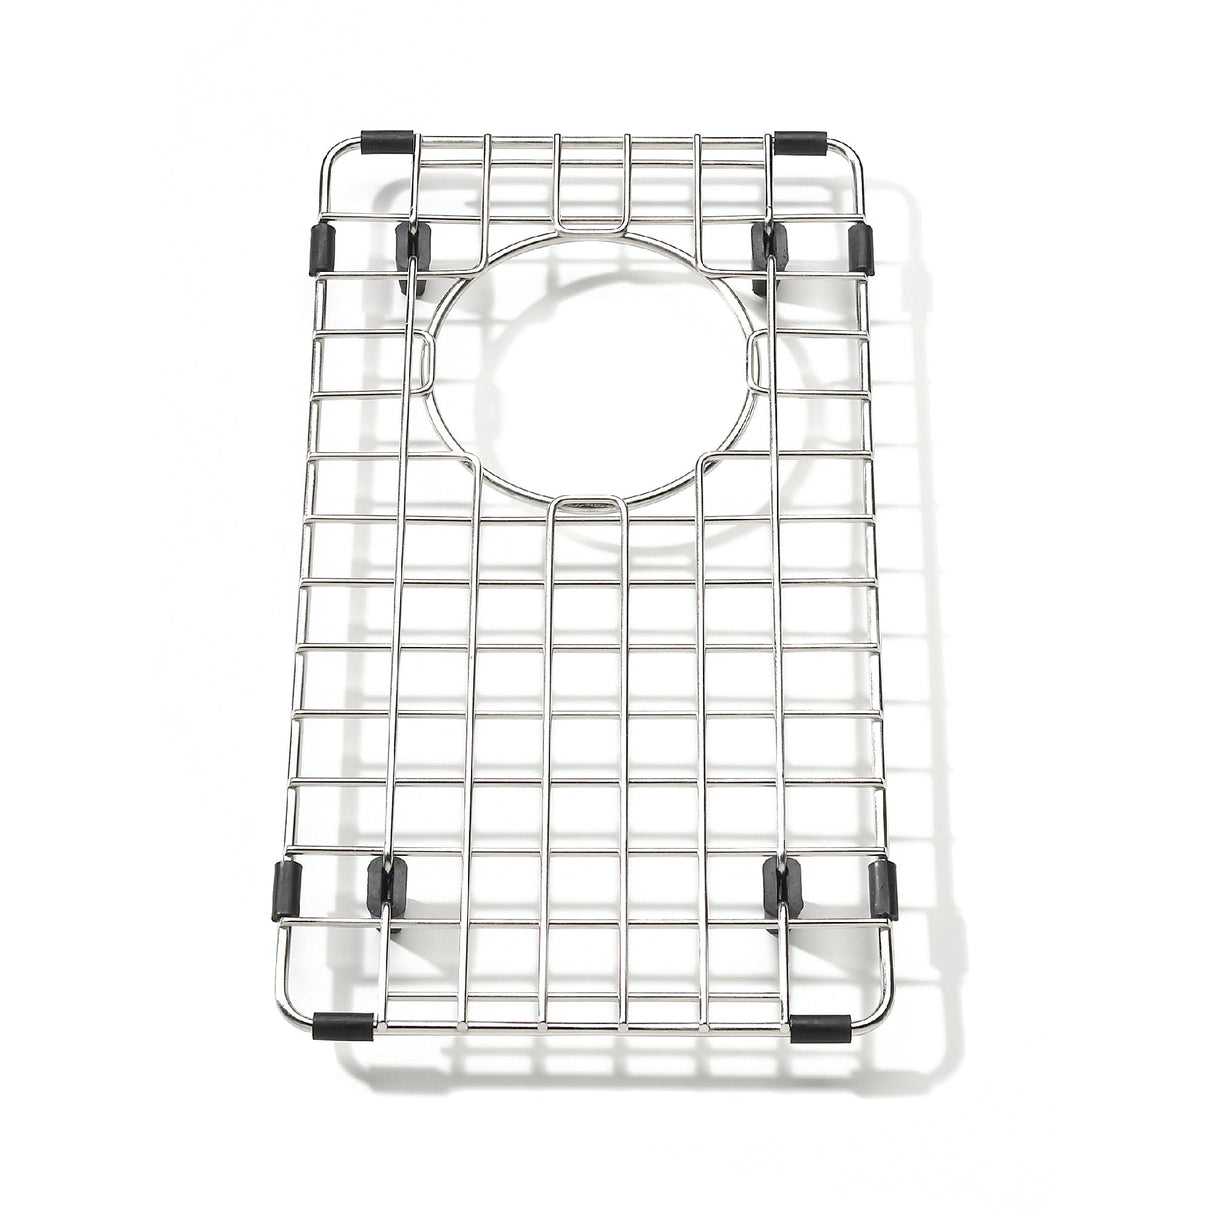 KINDRED BG170S Stainless Steel Bottom Grid for Sink 14-in x 7.75-in In Stainless Steel